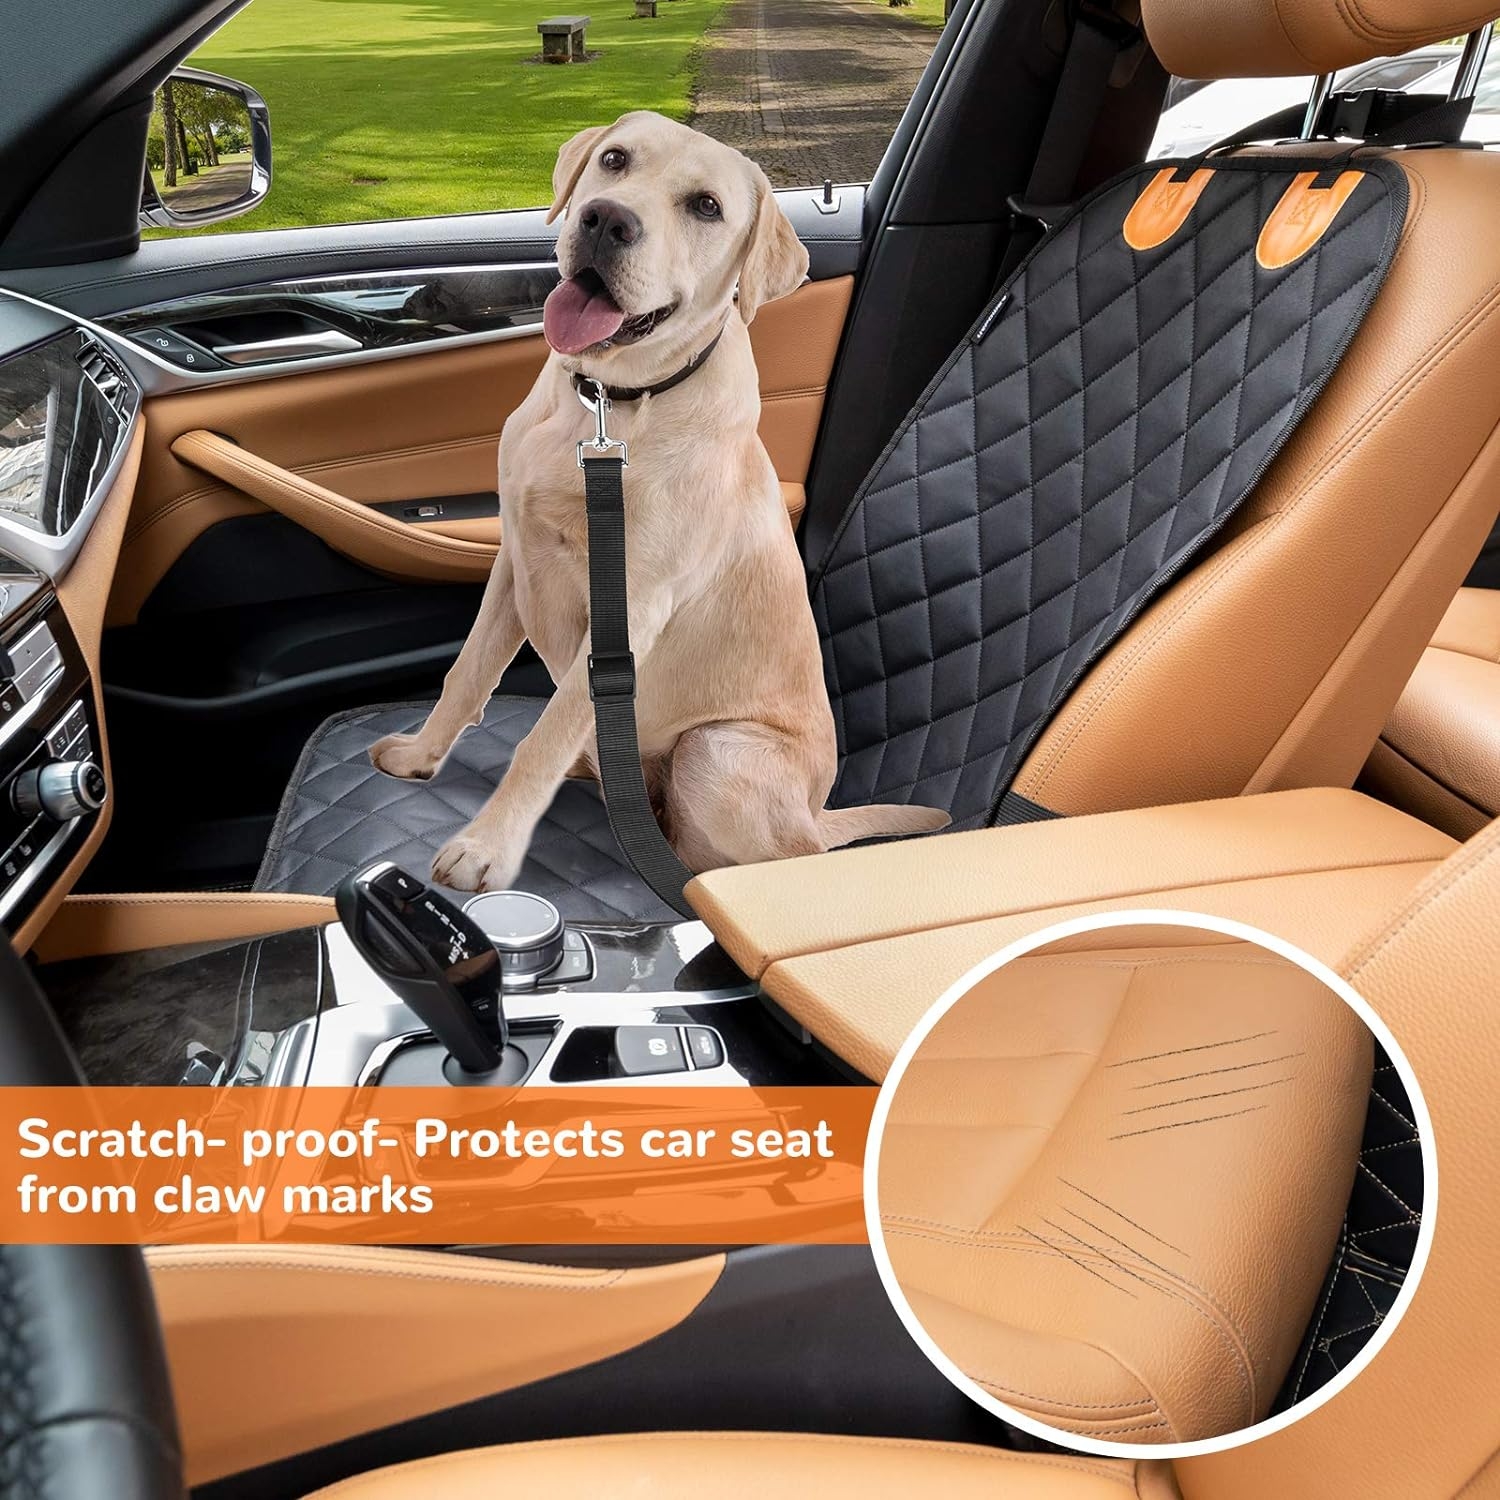 URPOWER Pet Front Seat Cover for Cars 100% Waterproof Nonslip Rubber Backing with Anchors, Quilted, Padded, Durable Pet Seat Covers for Cars, Trucks & SUVs